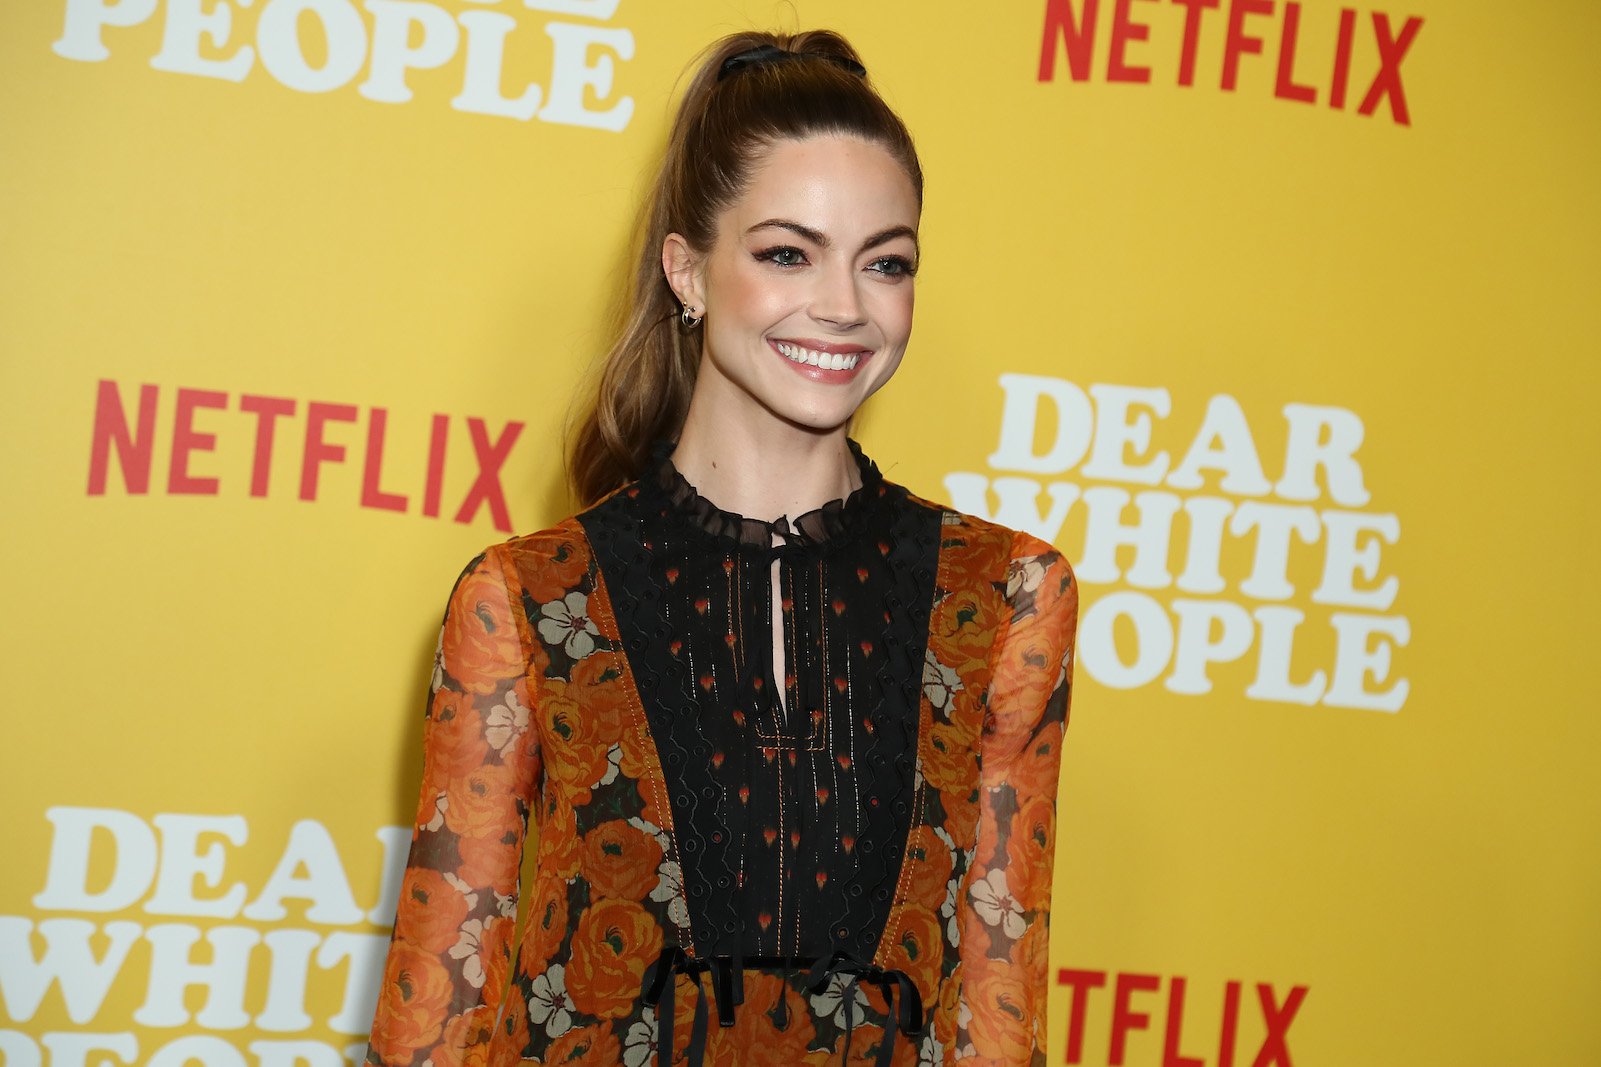 New 'Chicago Fire' Season 10 cast member Caitlin Carver smiling at an event against a yellow background 